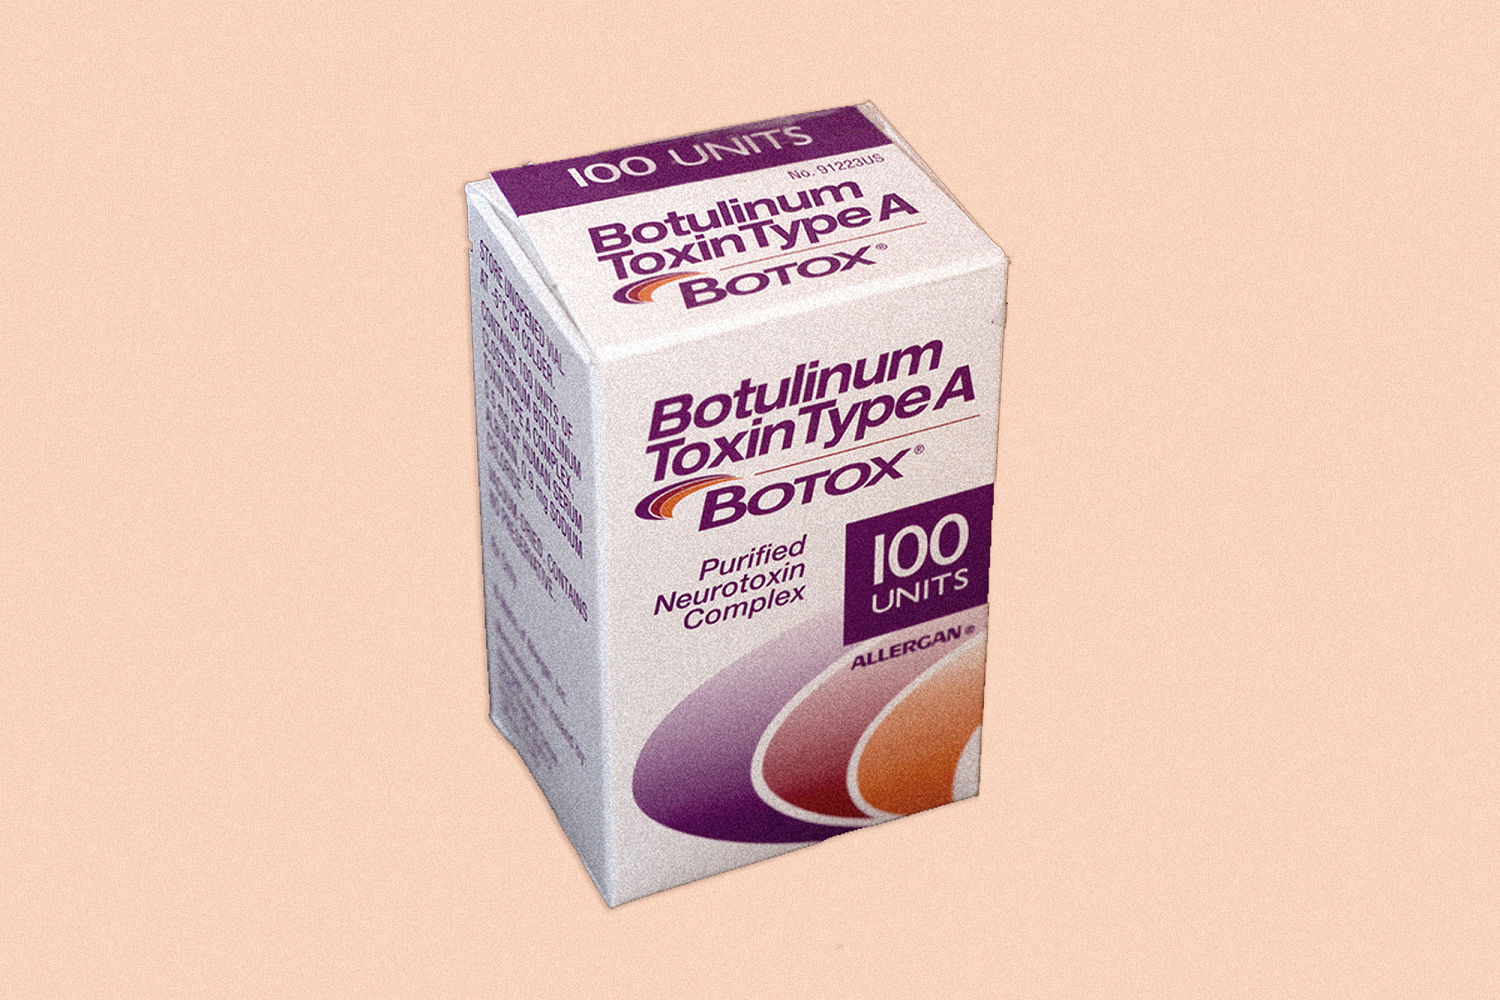 CDC investigating botched Botox shots in 9 states